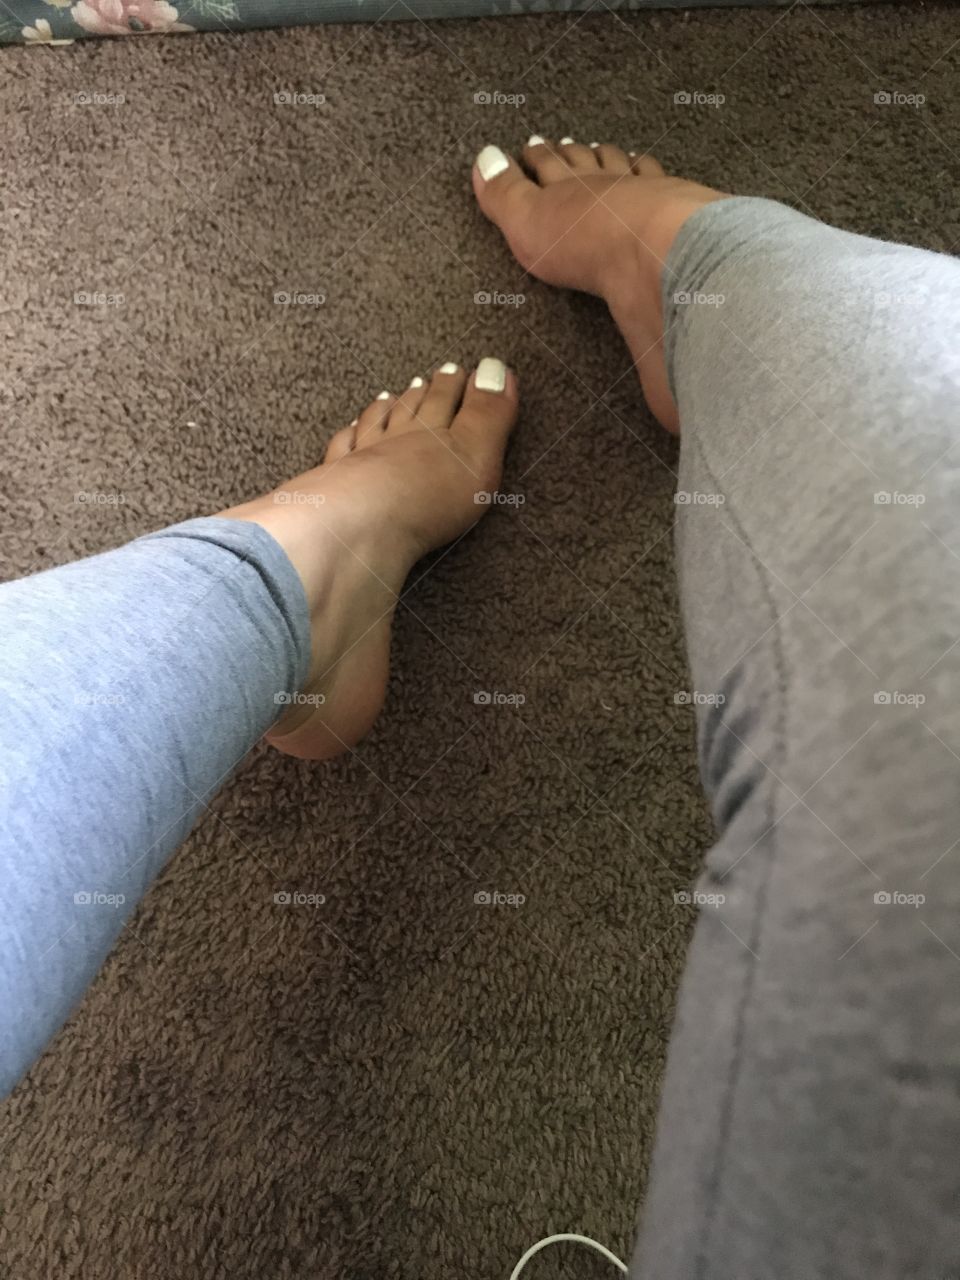 Feet pics!!! Message me for more! Pay me 